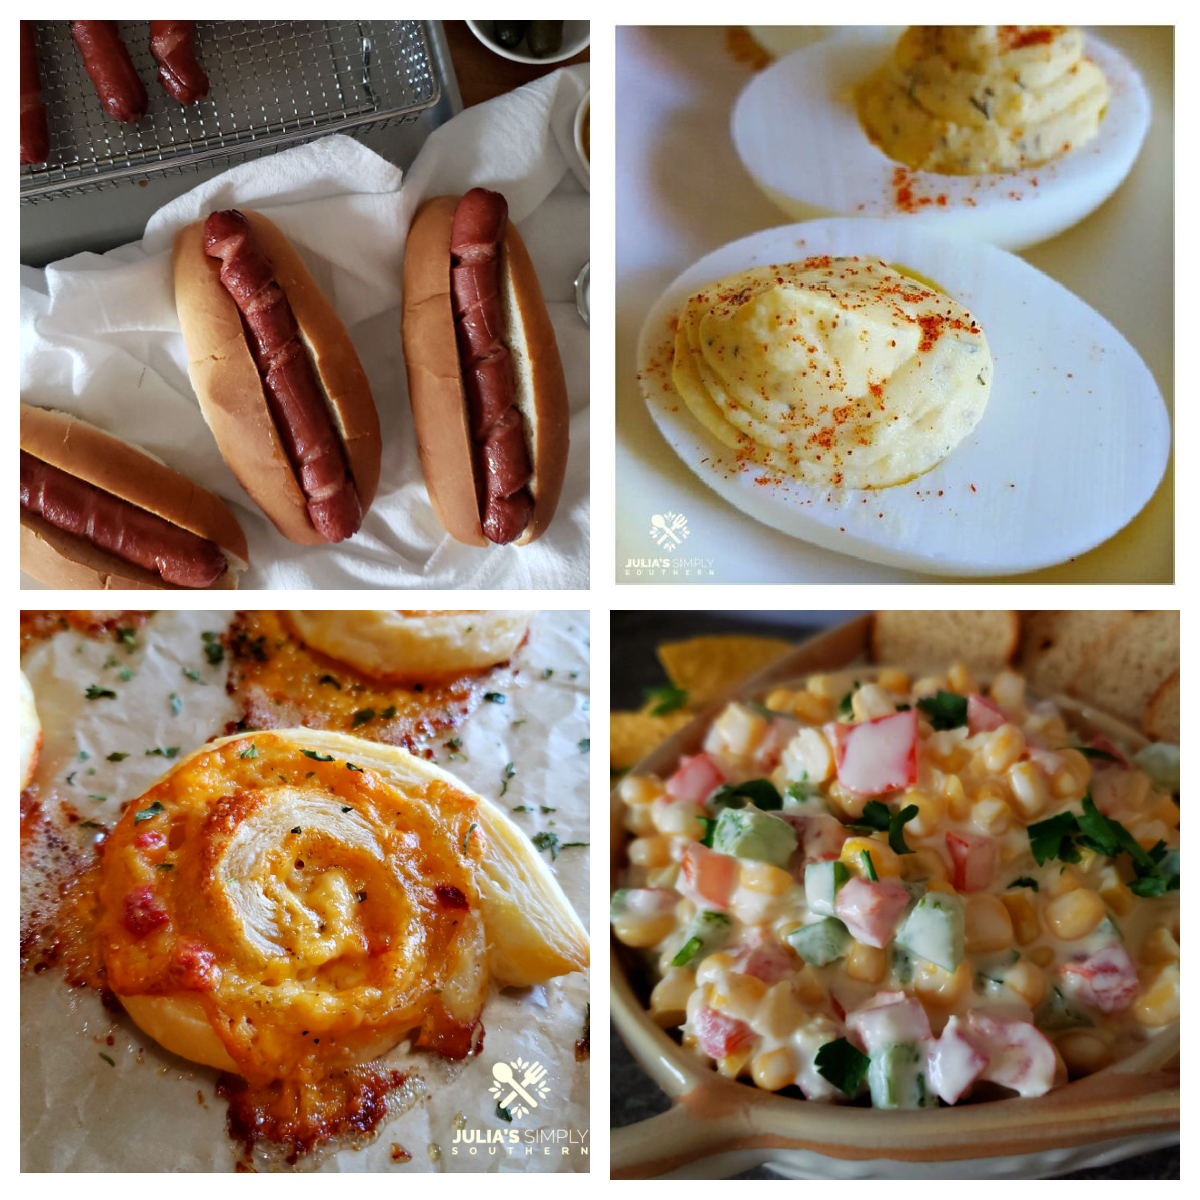 Post Cover Image for Labor Day Snack Ideas showing featured recipes